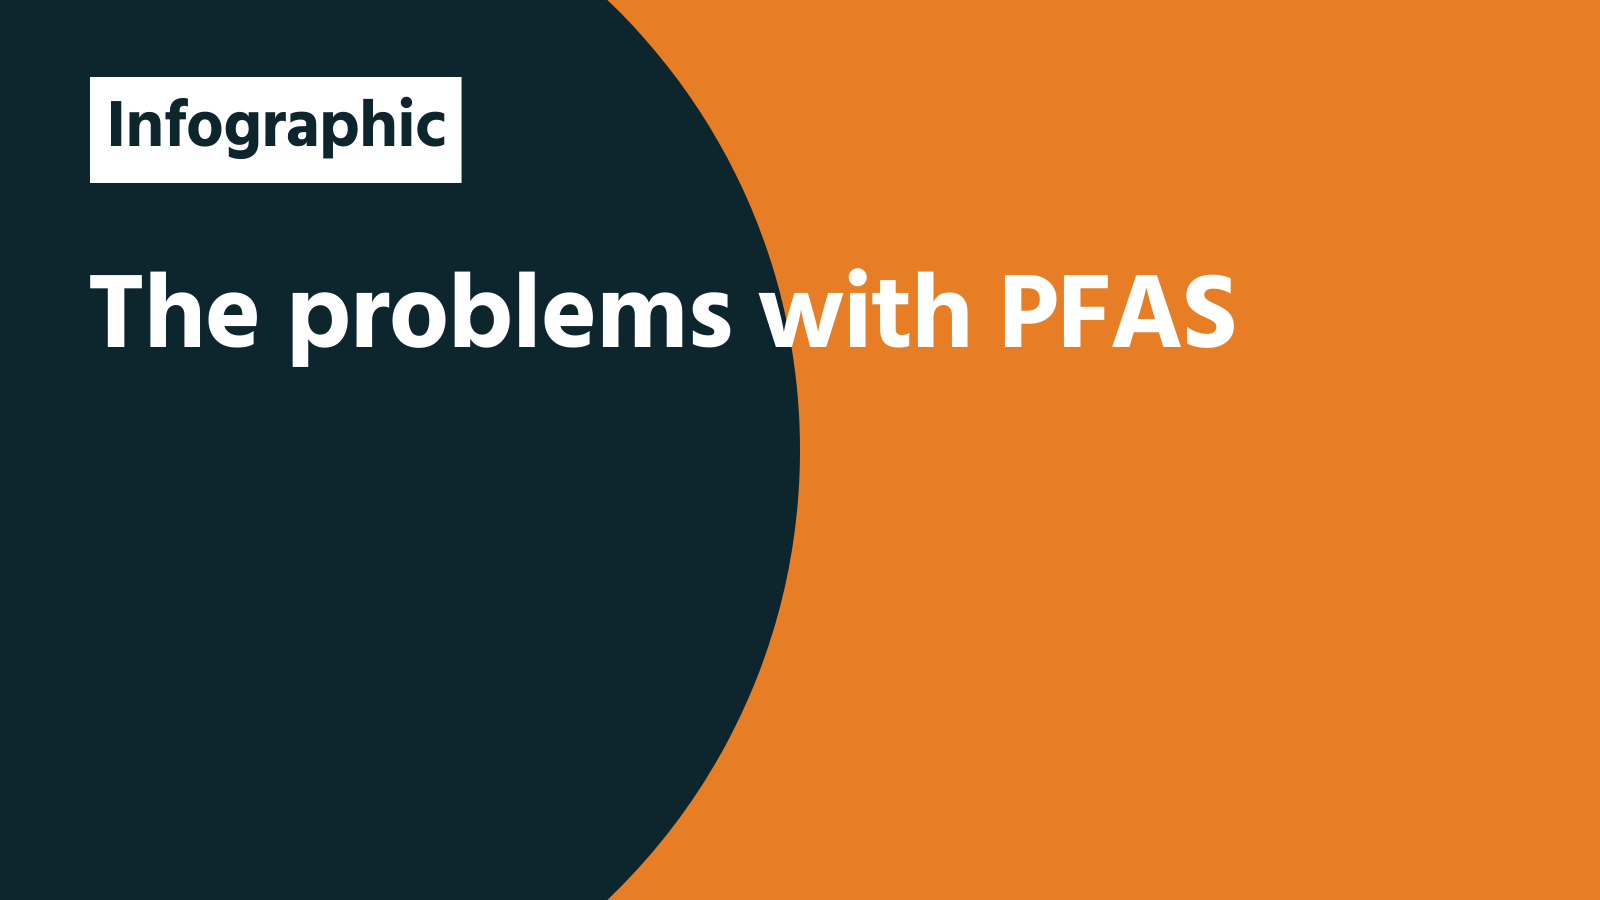 Infographic: The problems with PFAS